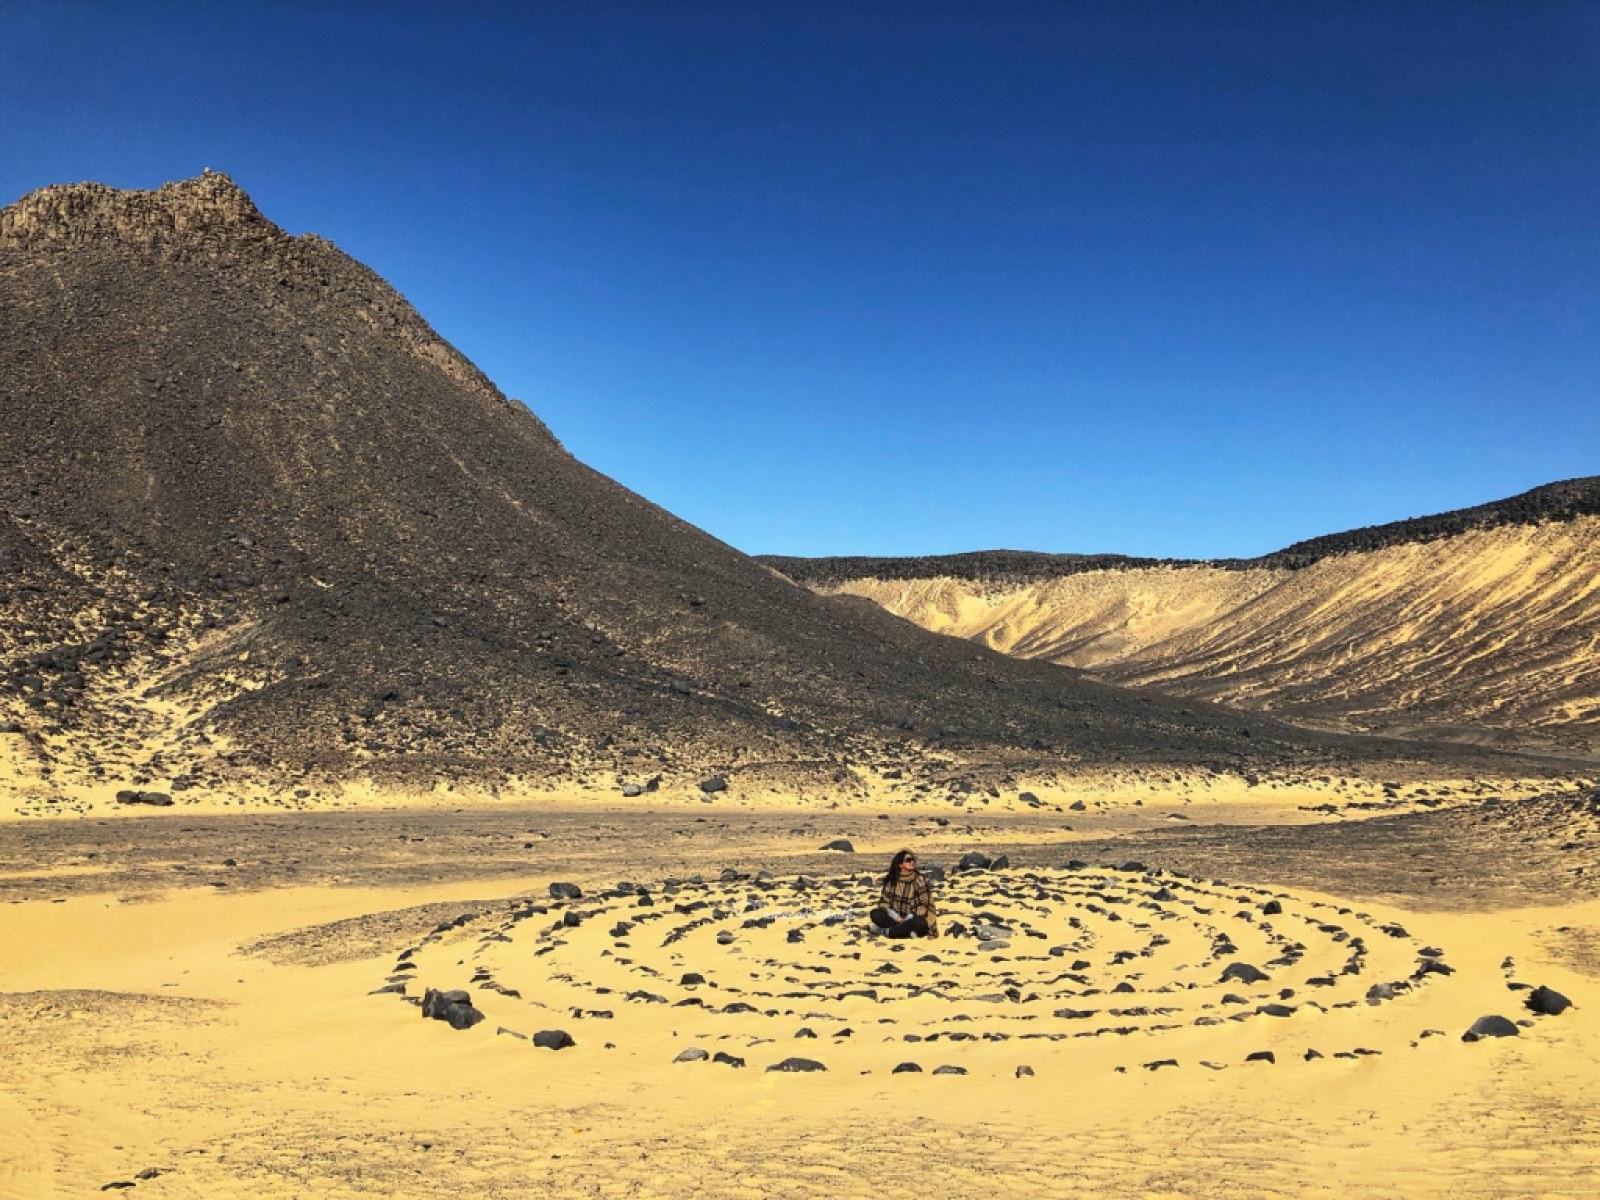 Indian traveller sitting in the centre of Concurrent circles made of black stones in brown desert